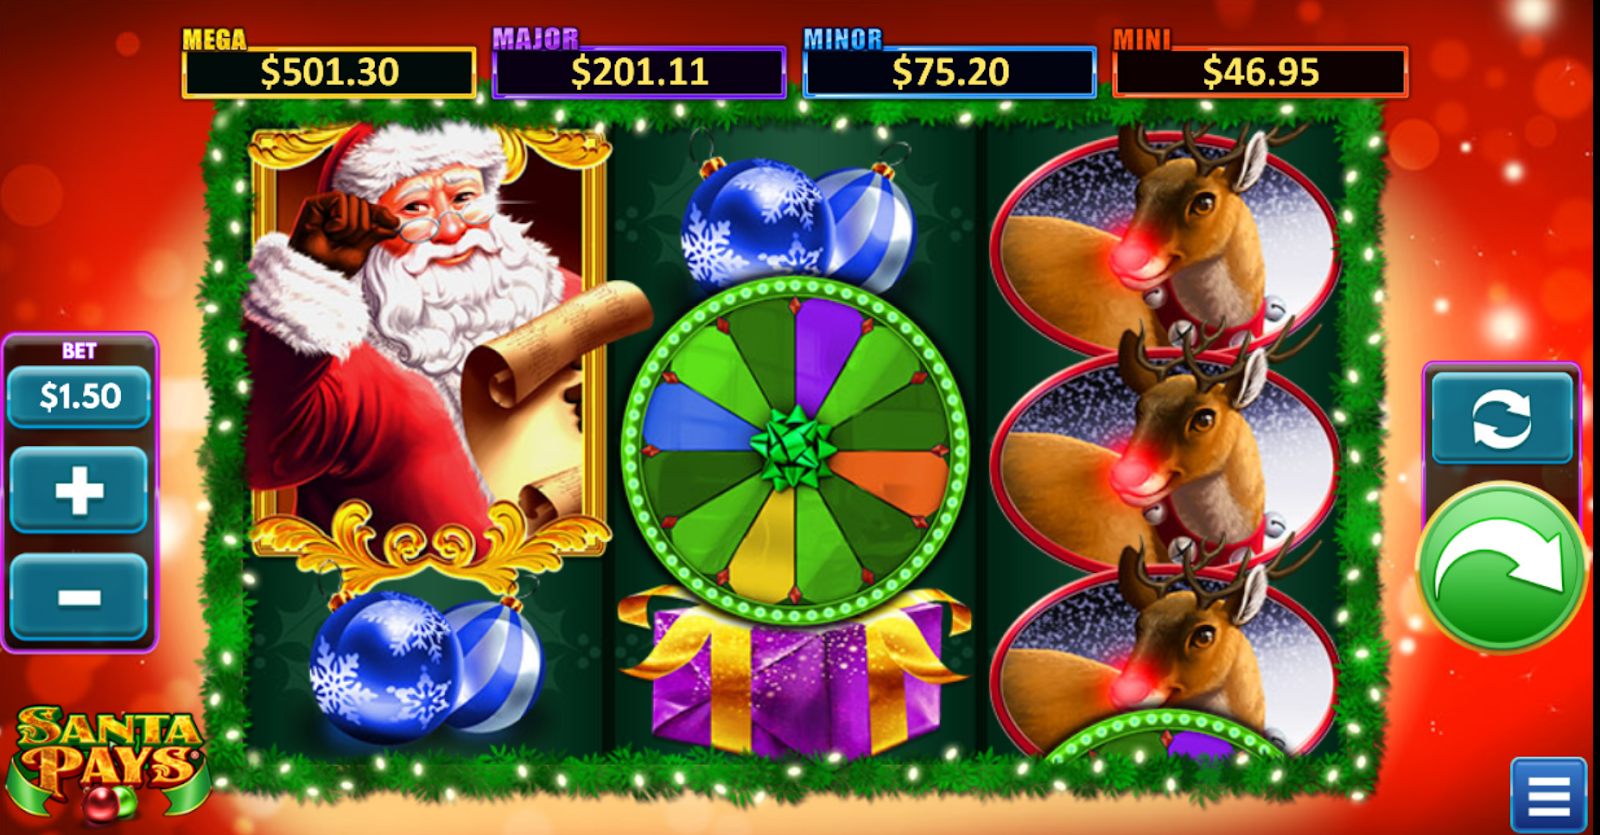 A screenshot of a slot game with Santa and reindeers.